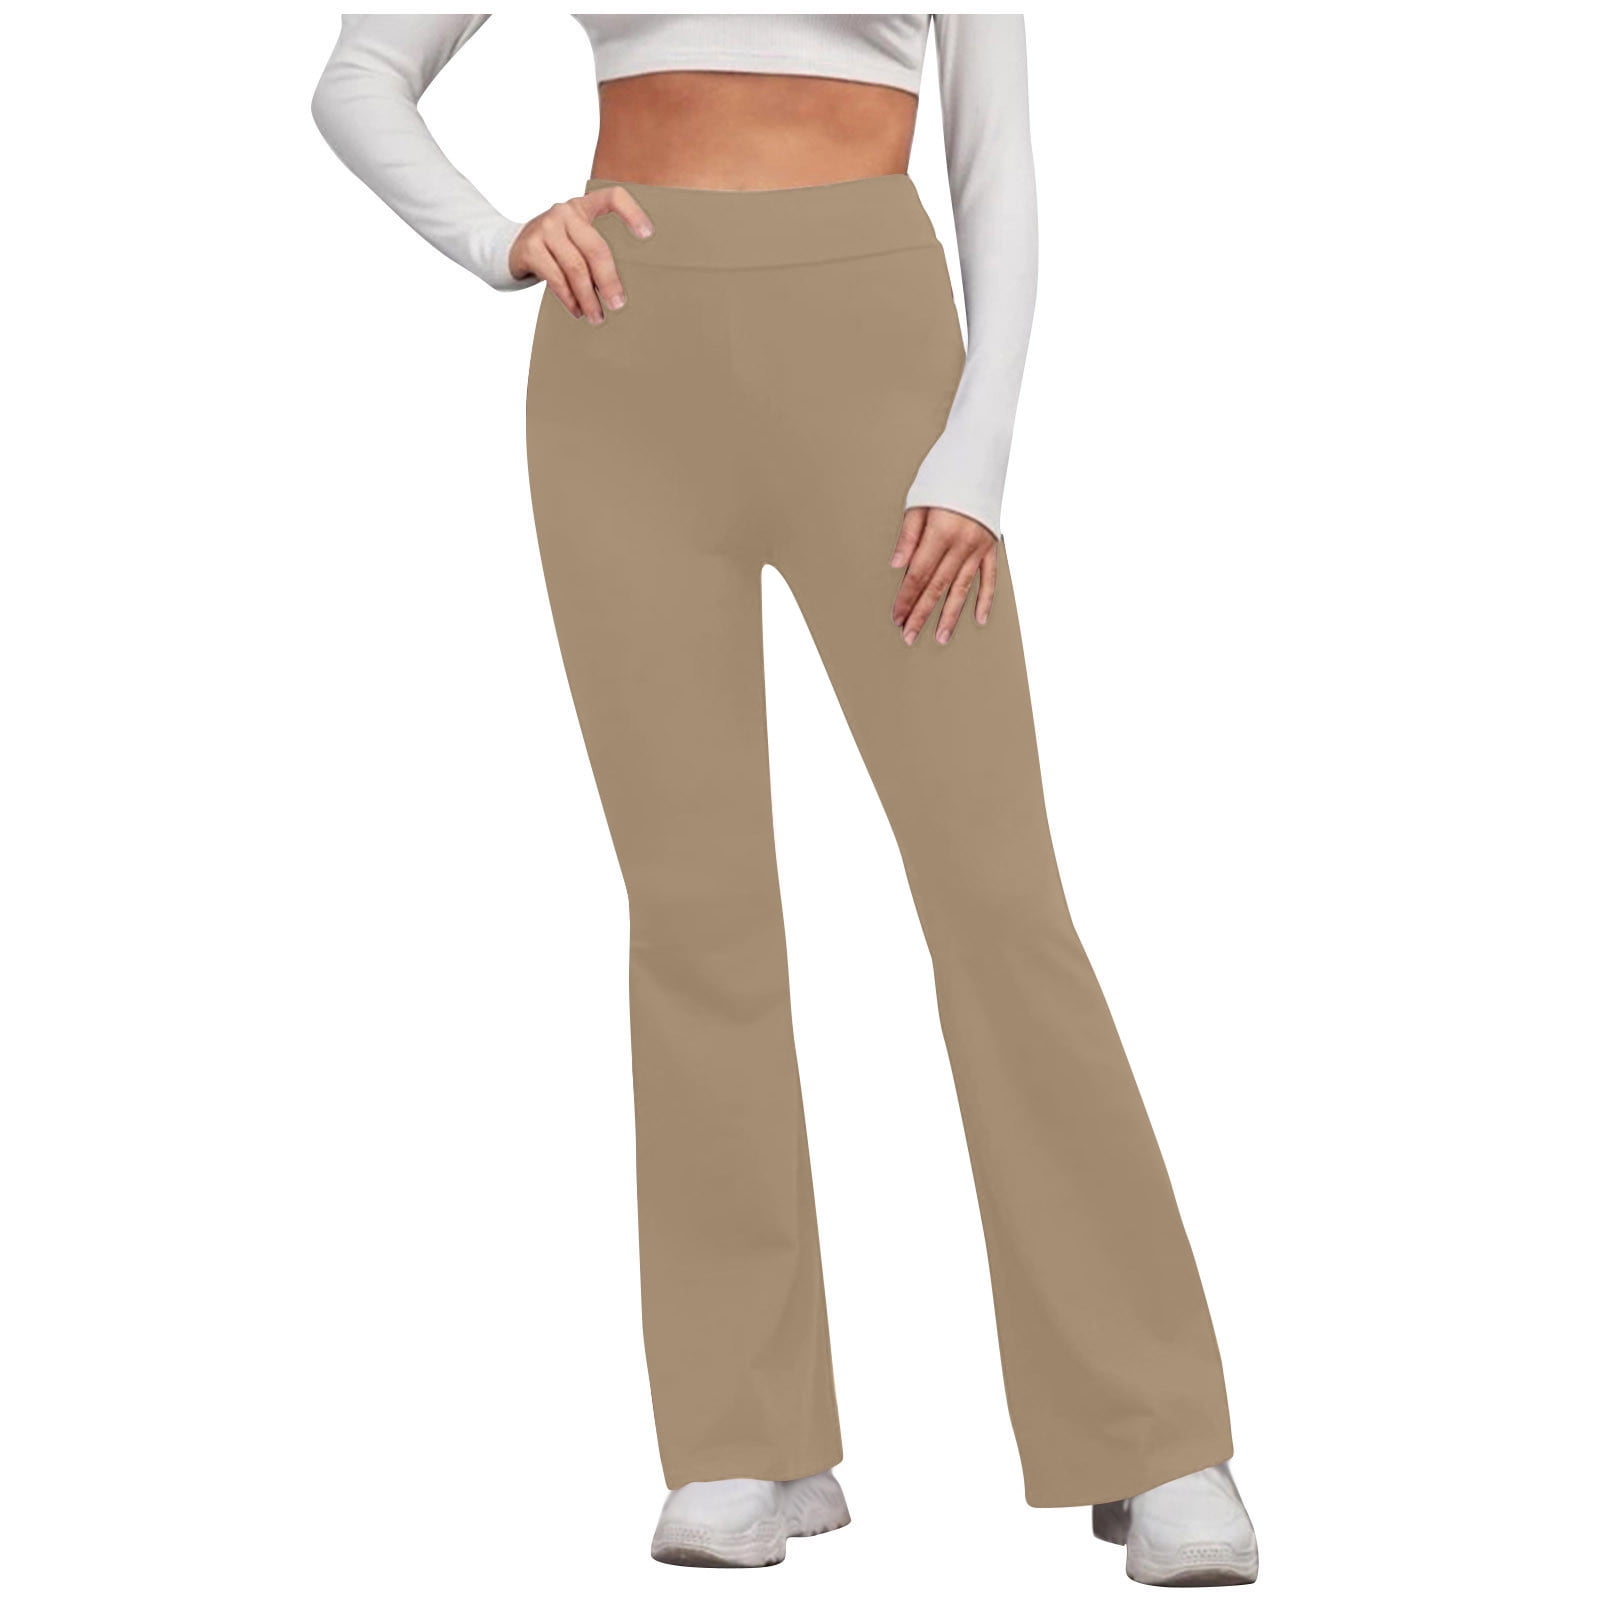 HAPIMO Women's Sports Yoga Leggings Flare Pants Summer Discount Stretch Fit  Solid Trousers for Girls Fashion Sale High Elastic Waist Breathable Khaki XL  